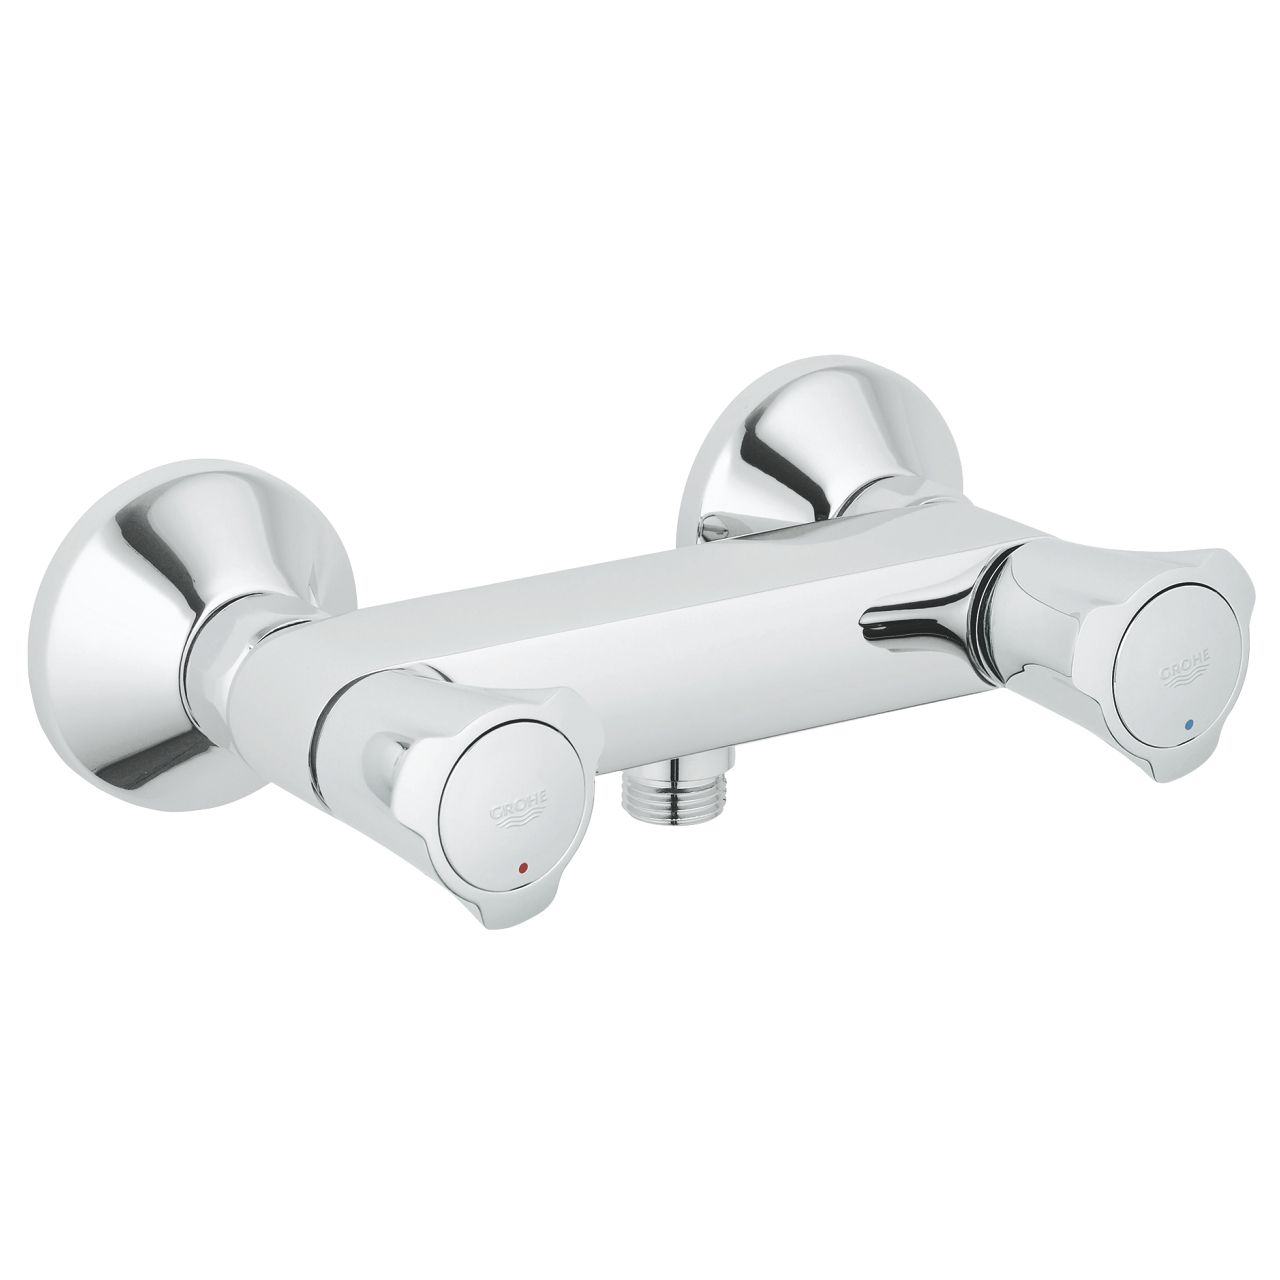  Grohe Costa L shower mixer - 26330001 